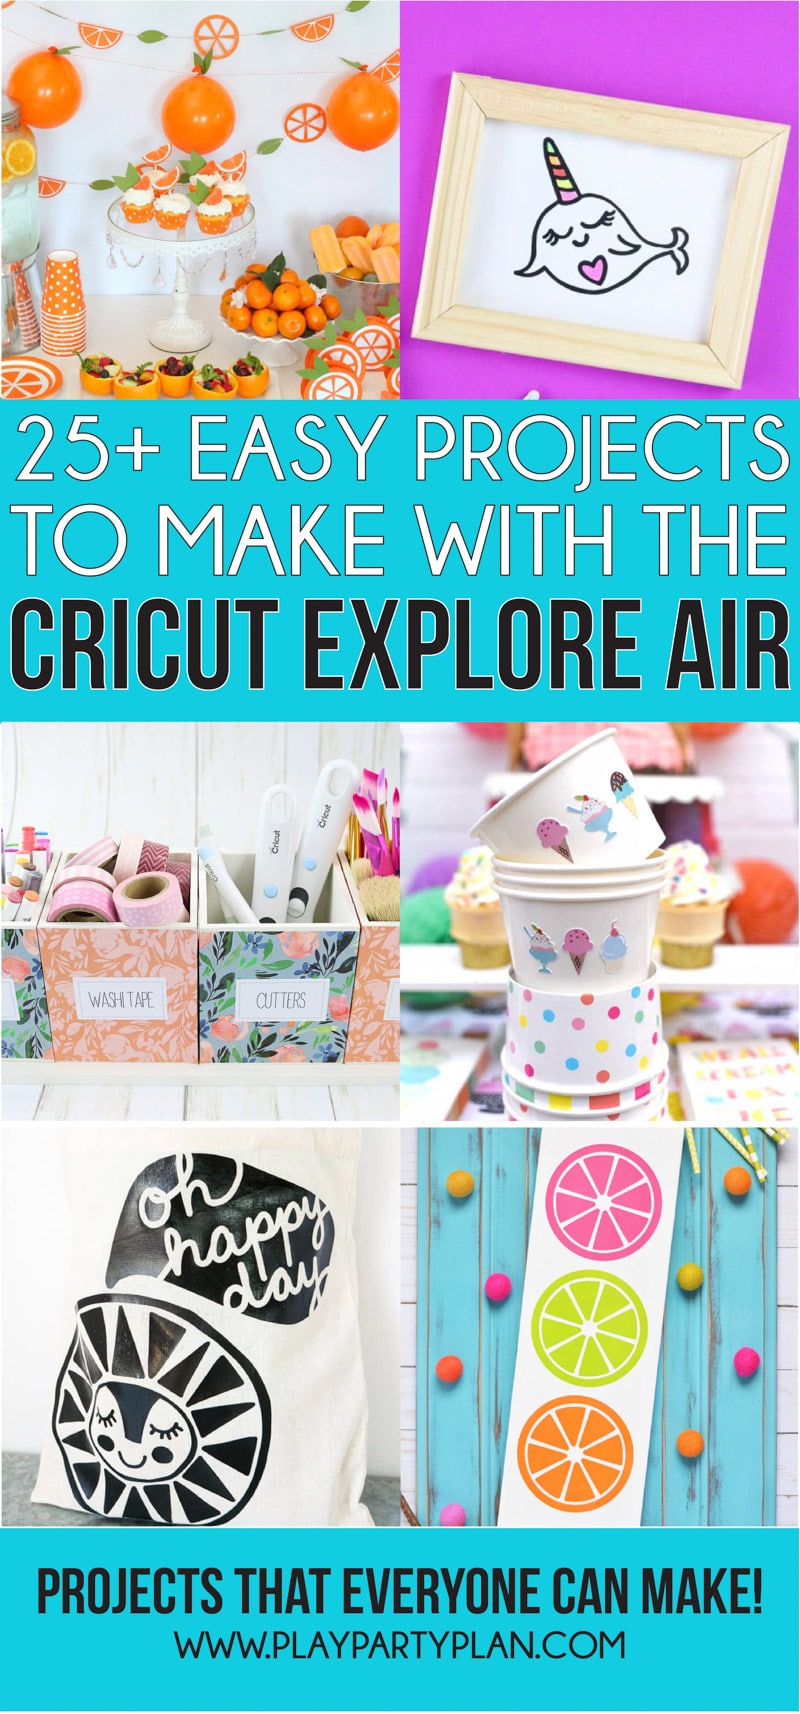 Tons of beginner Cricut projects you can make with a Cricut Explore Air or Cricut Maker! Whether you’re making them to sell or just want to DIY things for yourselves - this list of ideas has something for everyone!